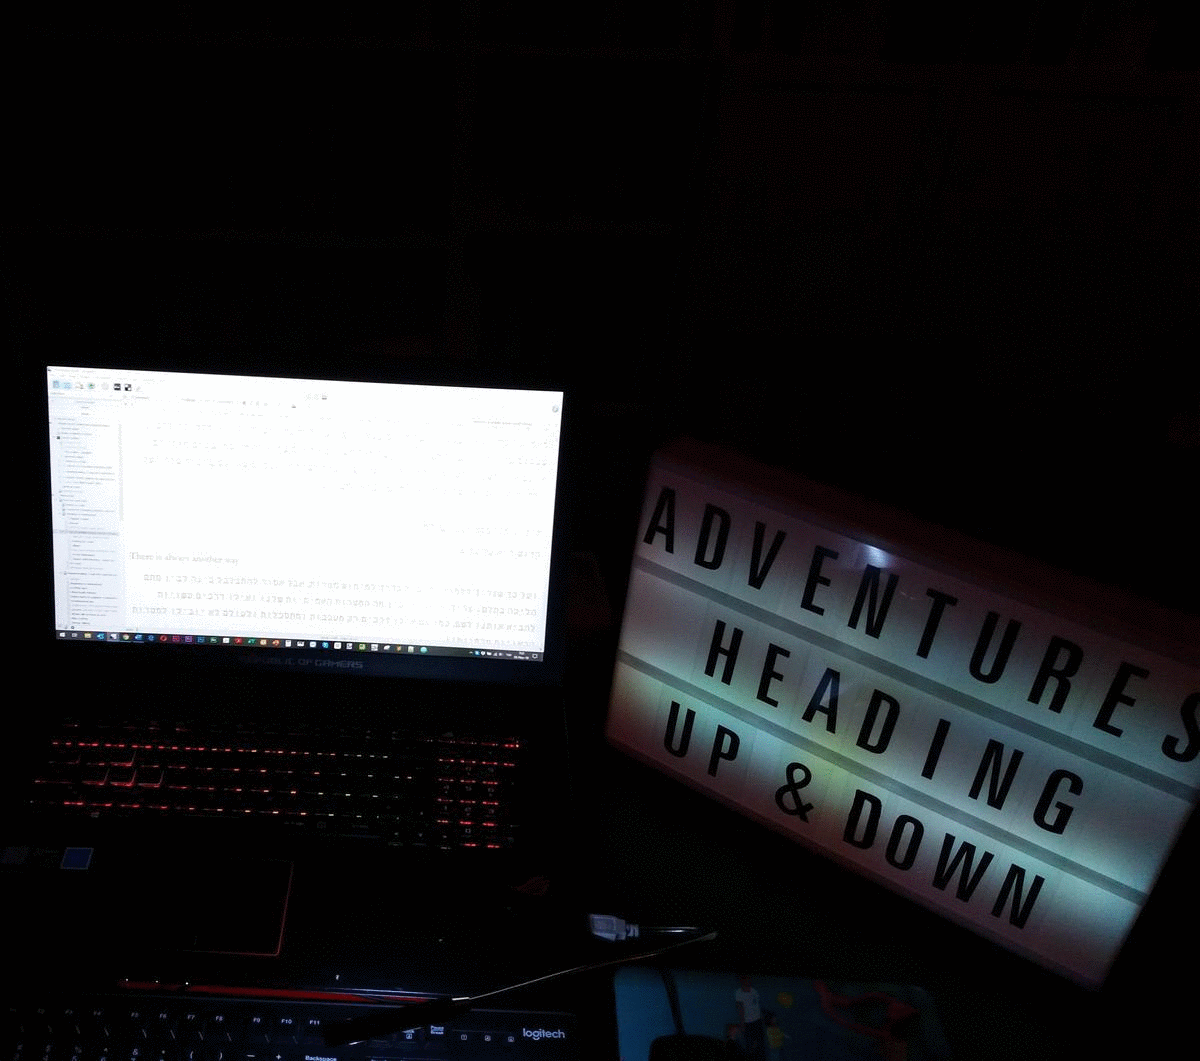 A gif of a desk with an open laptop and a lightbox with the words “ADVENTURES HEADING UP AND DOWN” over changing colors.